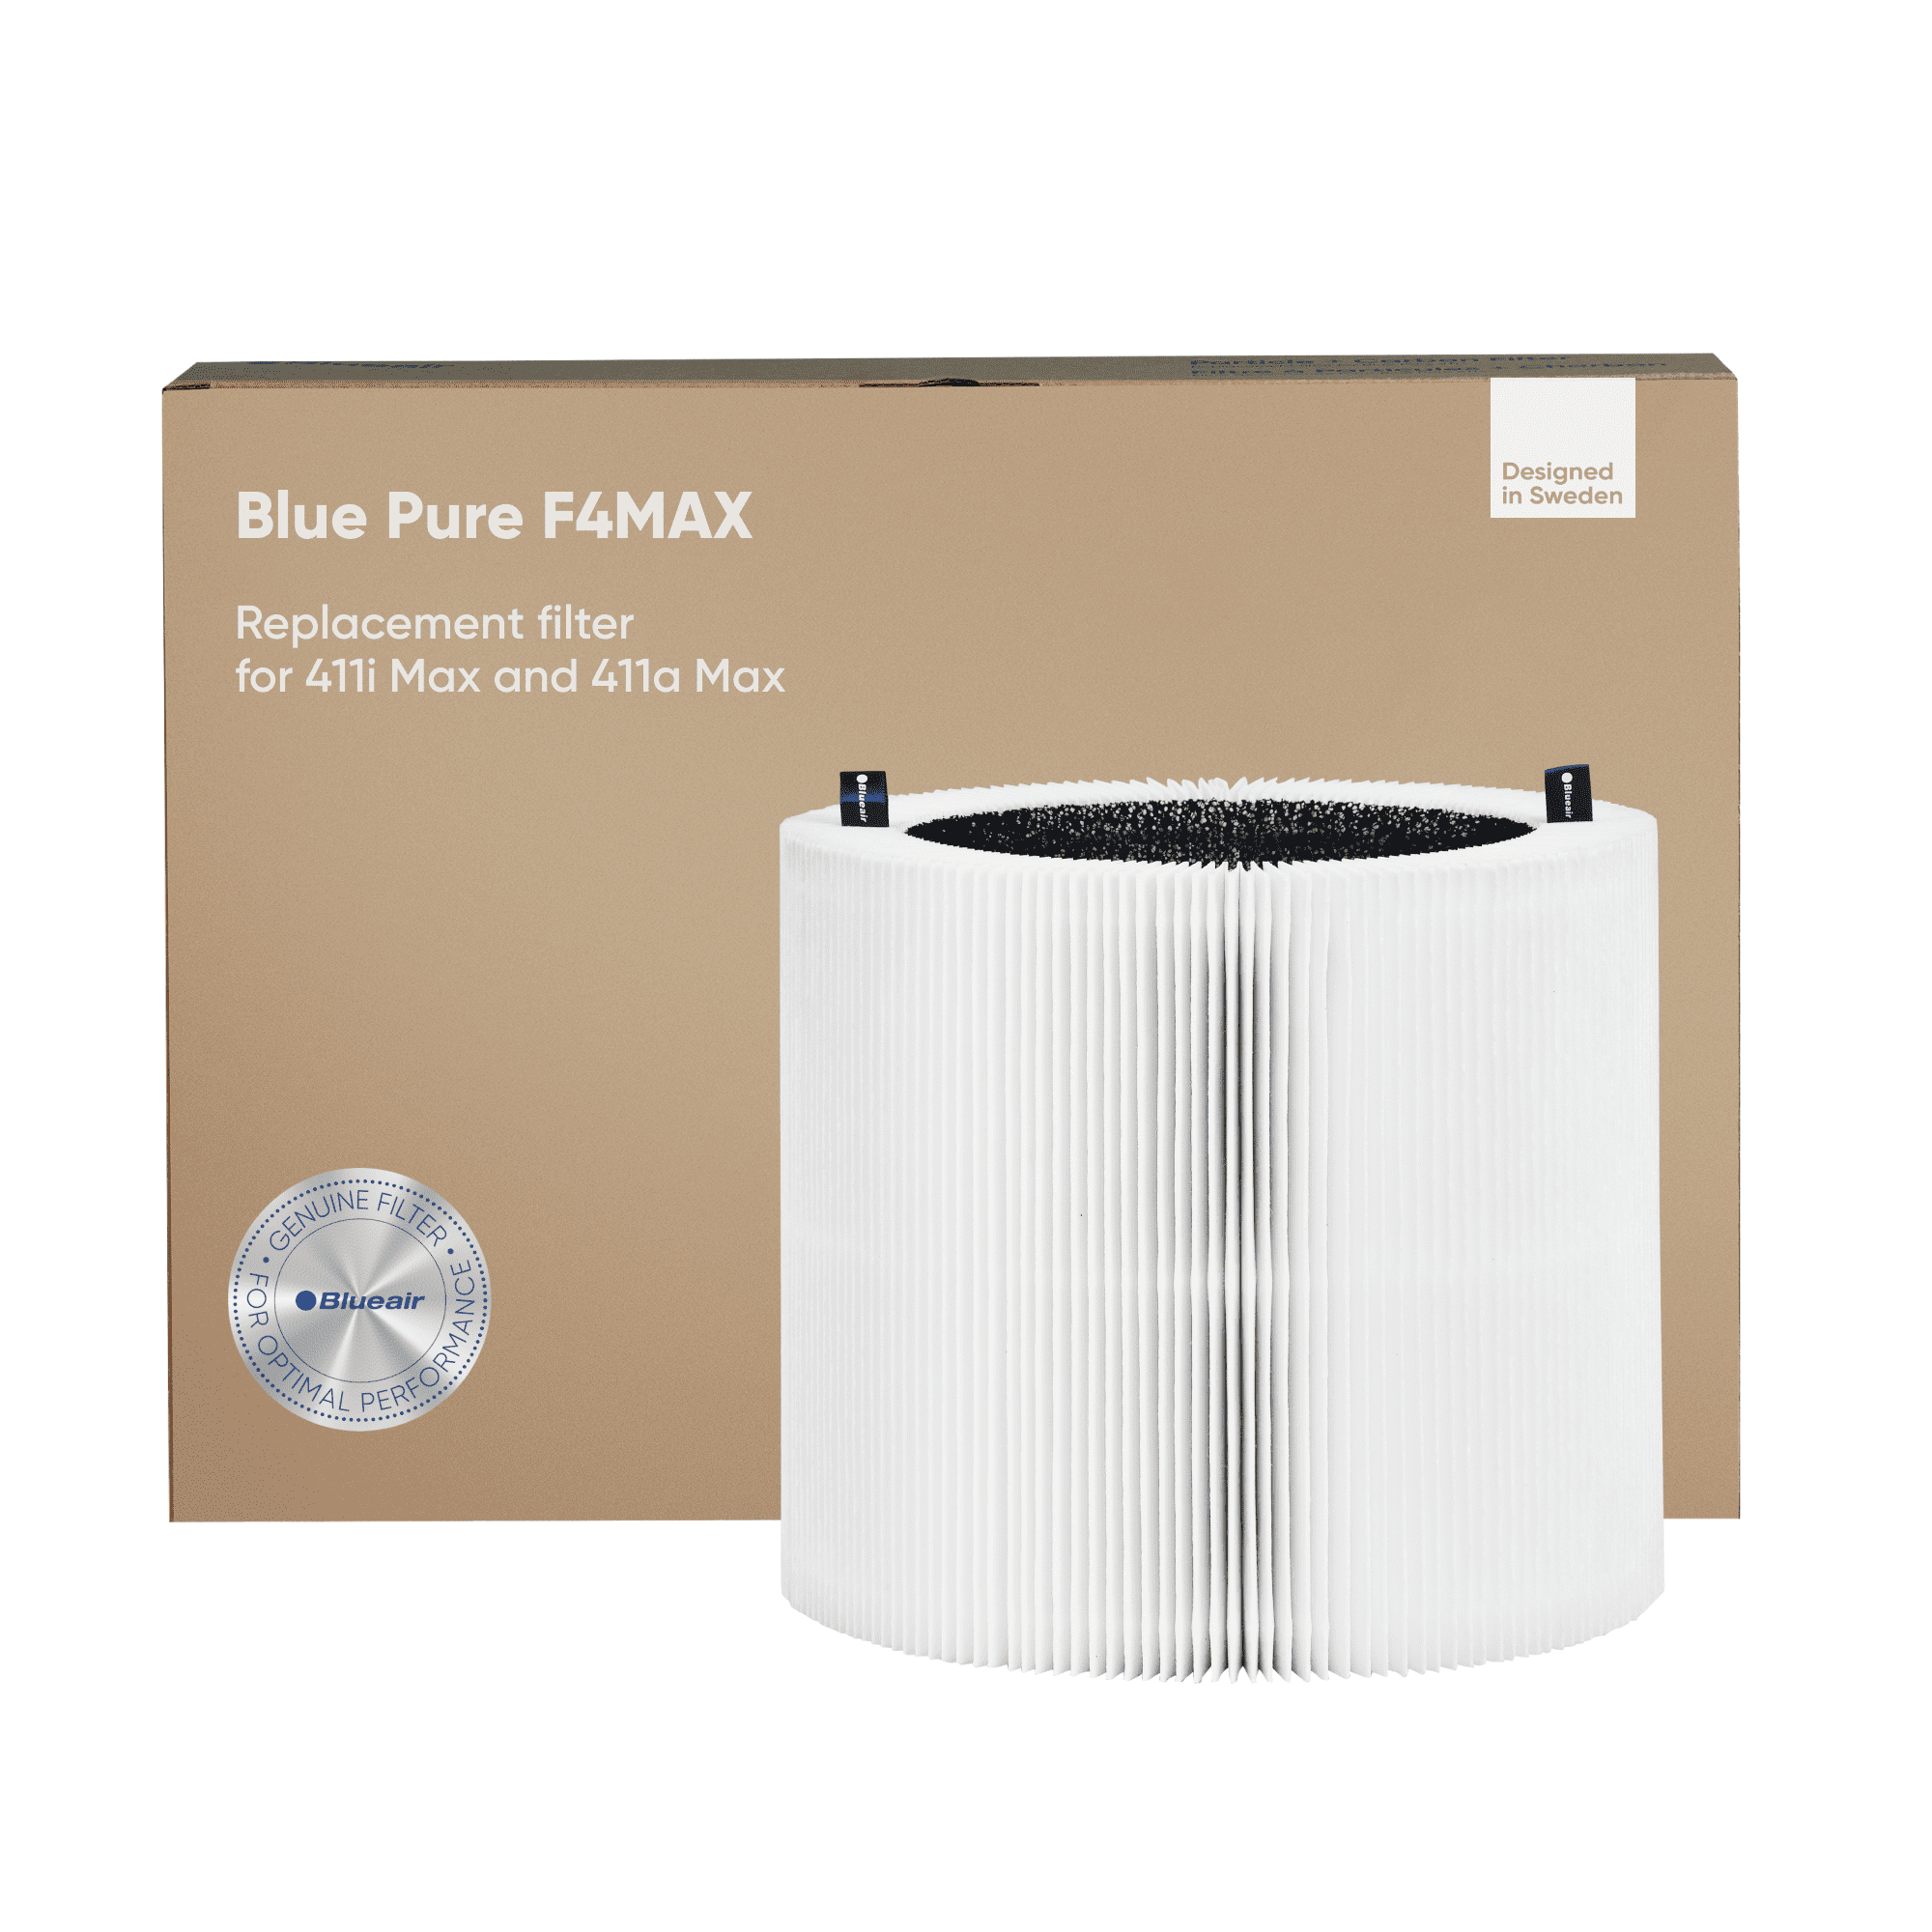 BLUEAIR Blue Pure 411a Max Genuine Replacement Filter, Blue Pure F4MAX ...